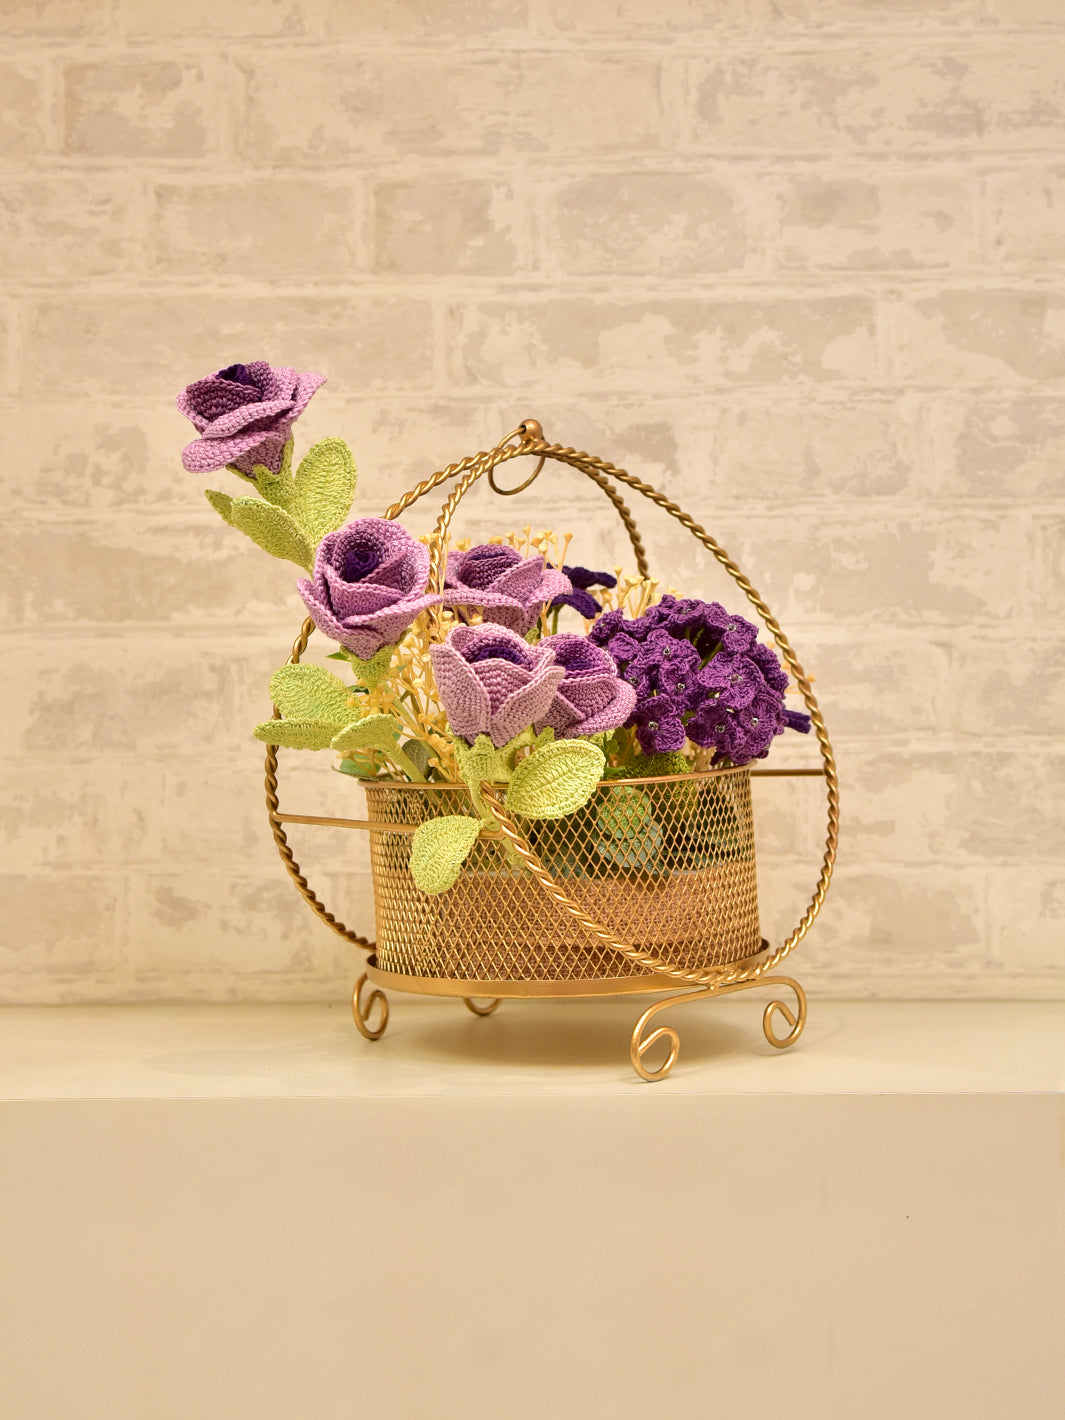 Enchanting Harmony: Crochet Floral Arrangement with Purple Roses & Daisies